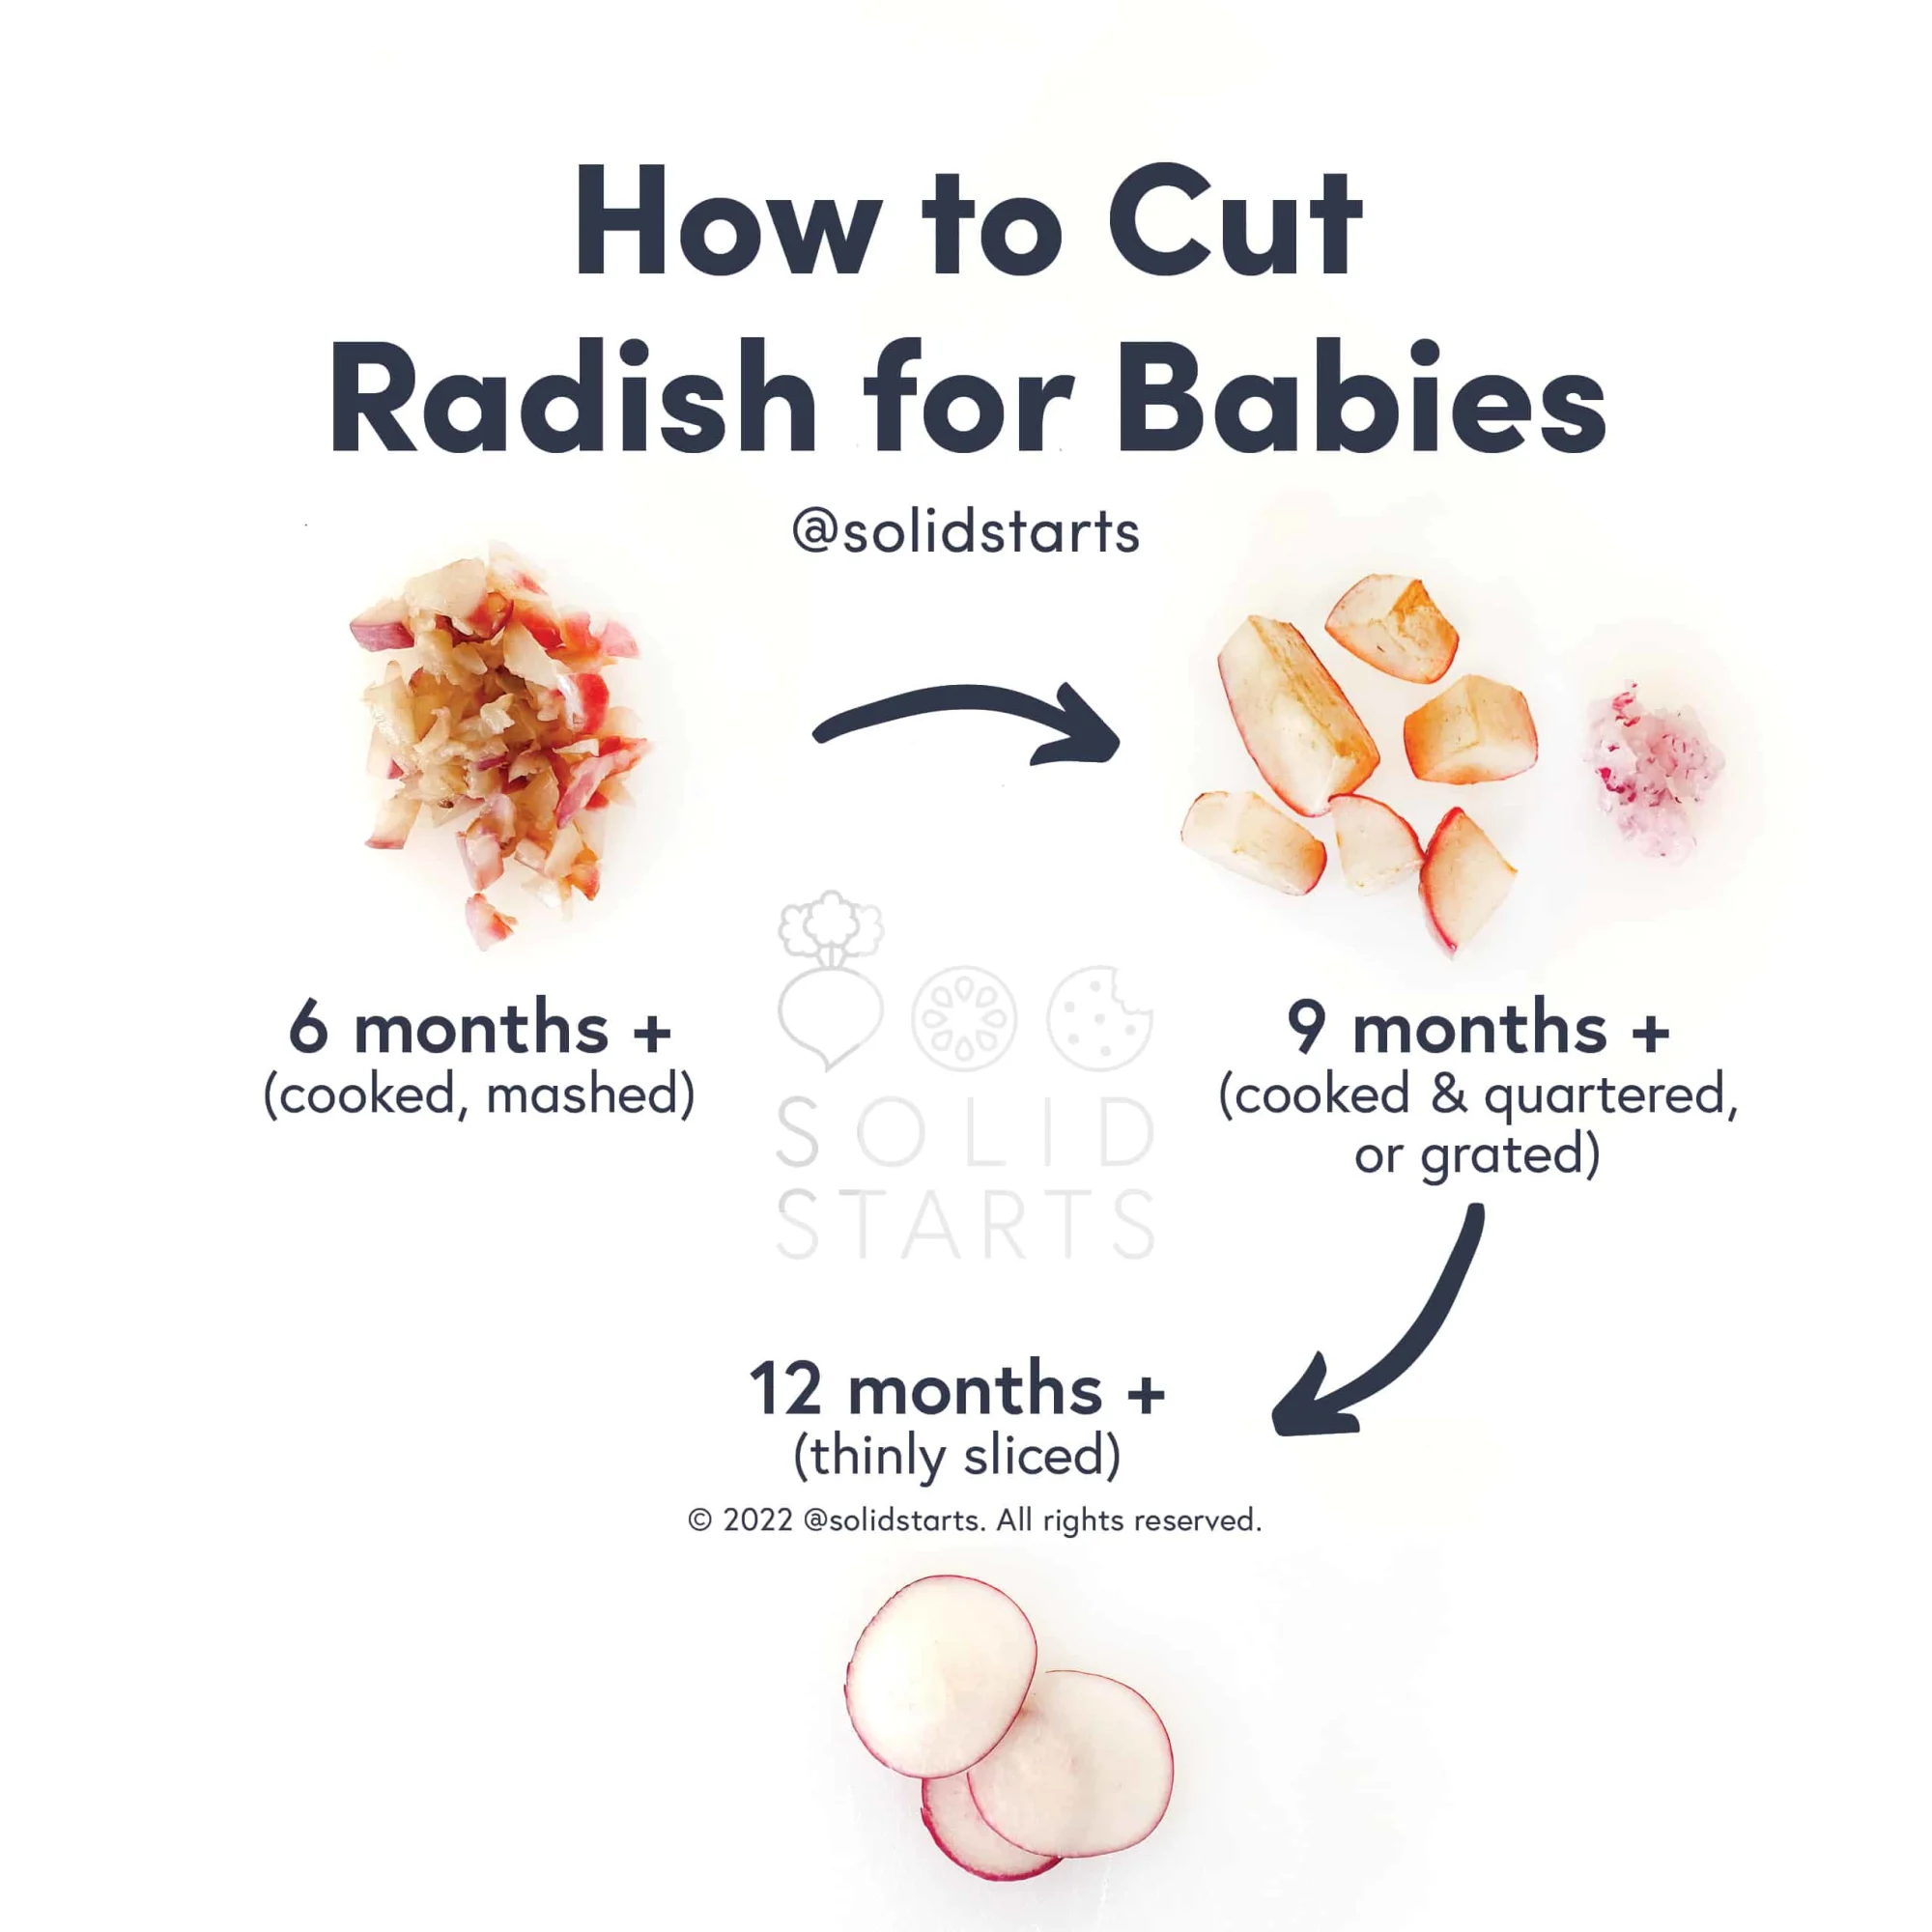 a Solid Starts infographic with the header "How to Cut Radish for Babies": cooked and mashed for 6 mos+, cooked and quartered for 9 mos+, thinly sliced cooked or raw for 12 months+